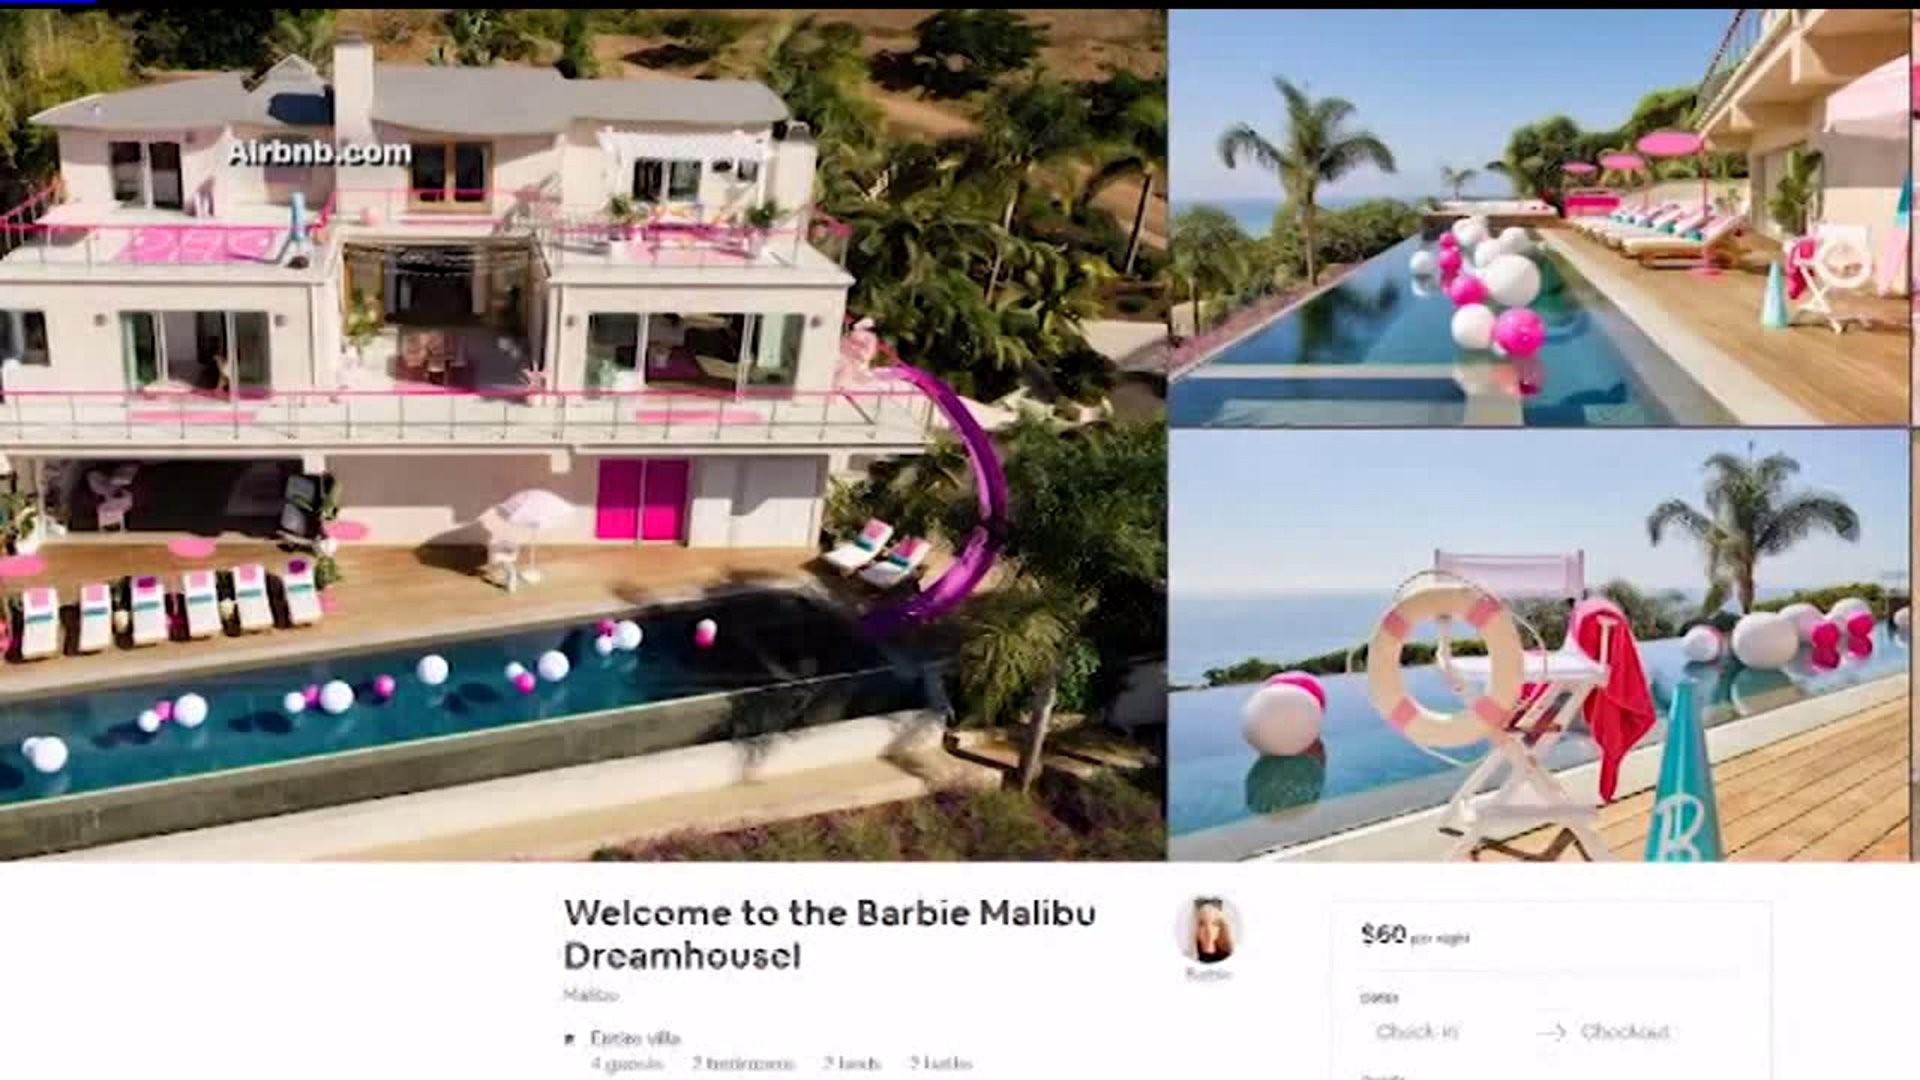 Barbie's Malibu Dreamhouse will be on Airbnb for $60 night